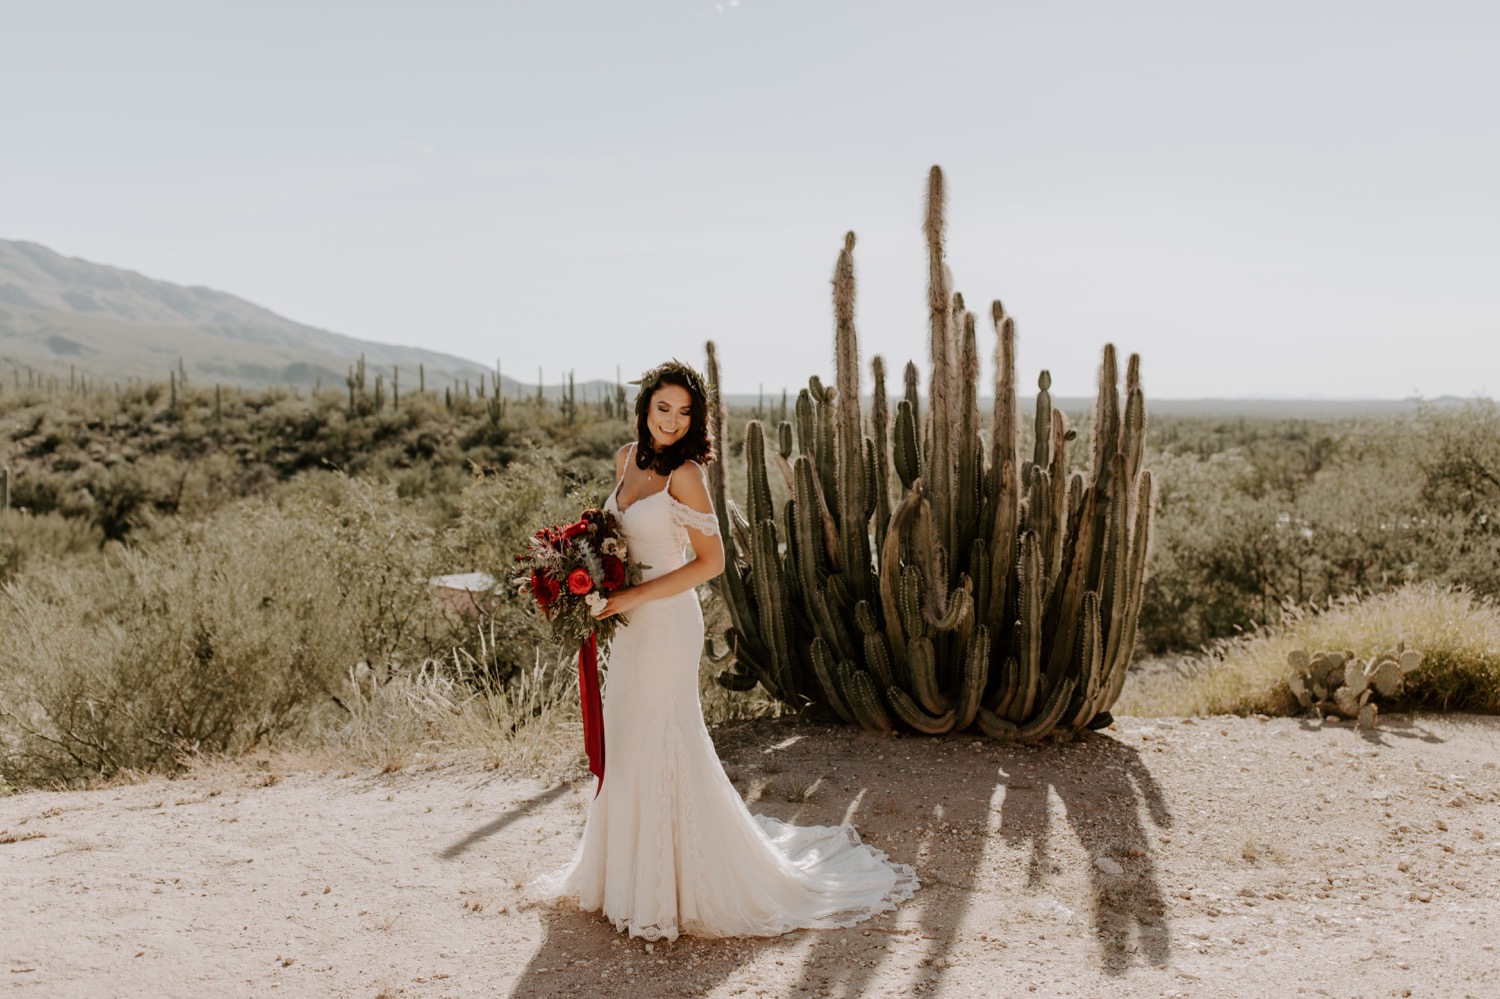 The bride glowing in the desert sun before her ceremony